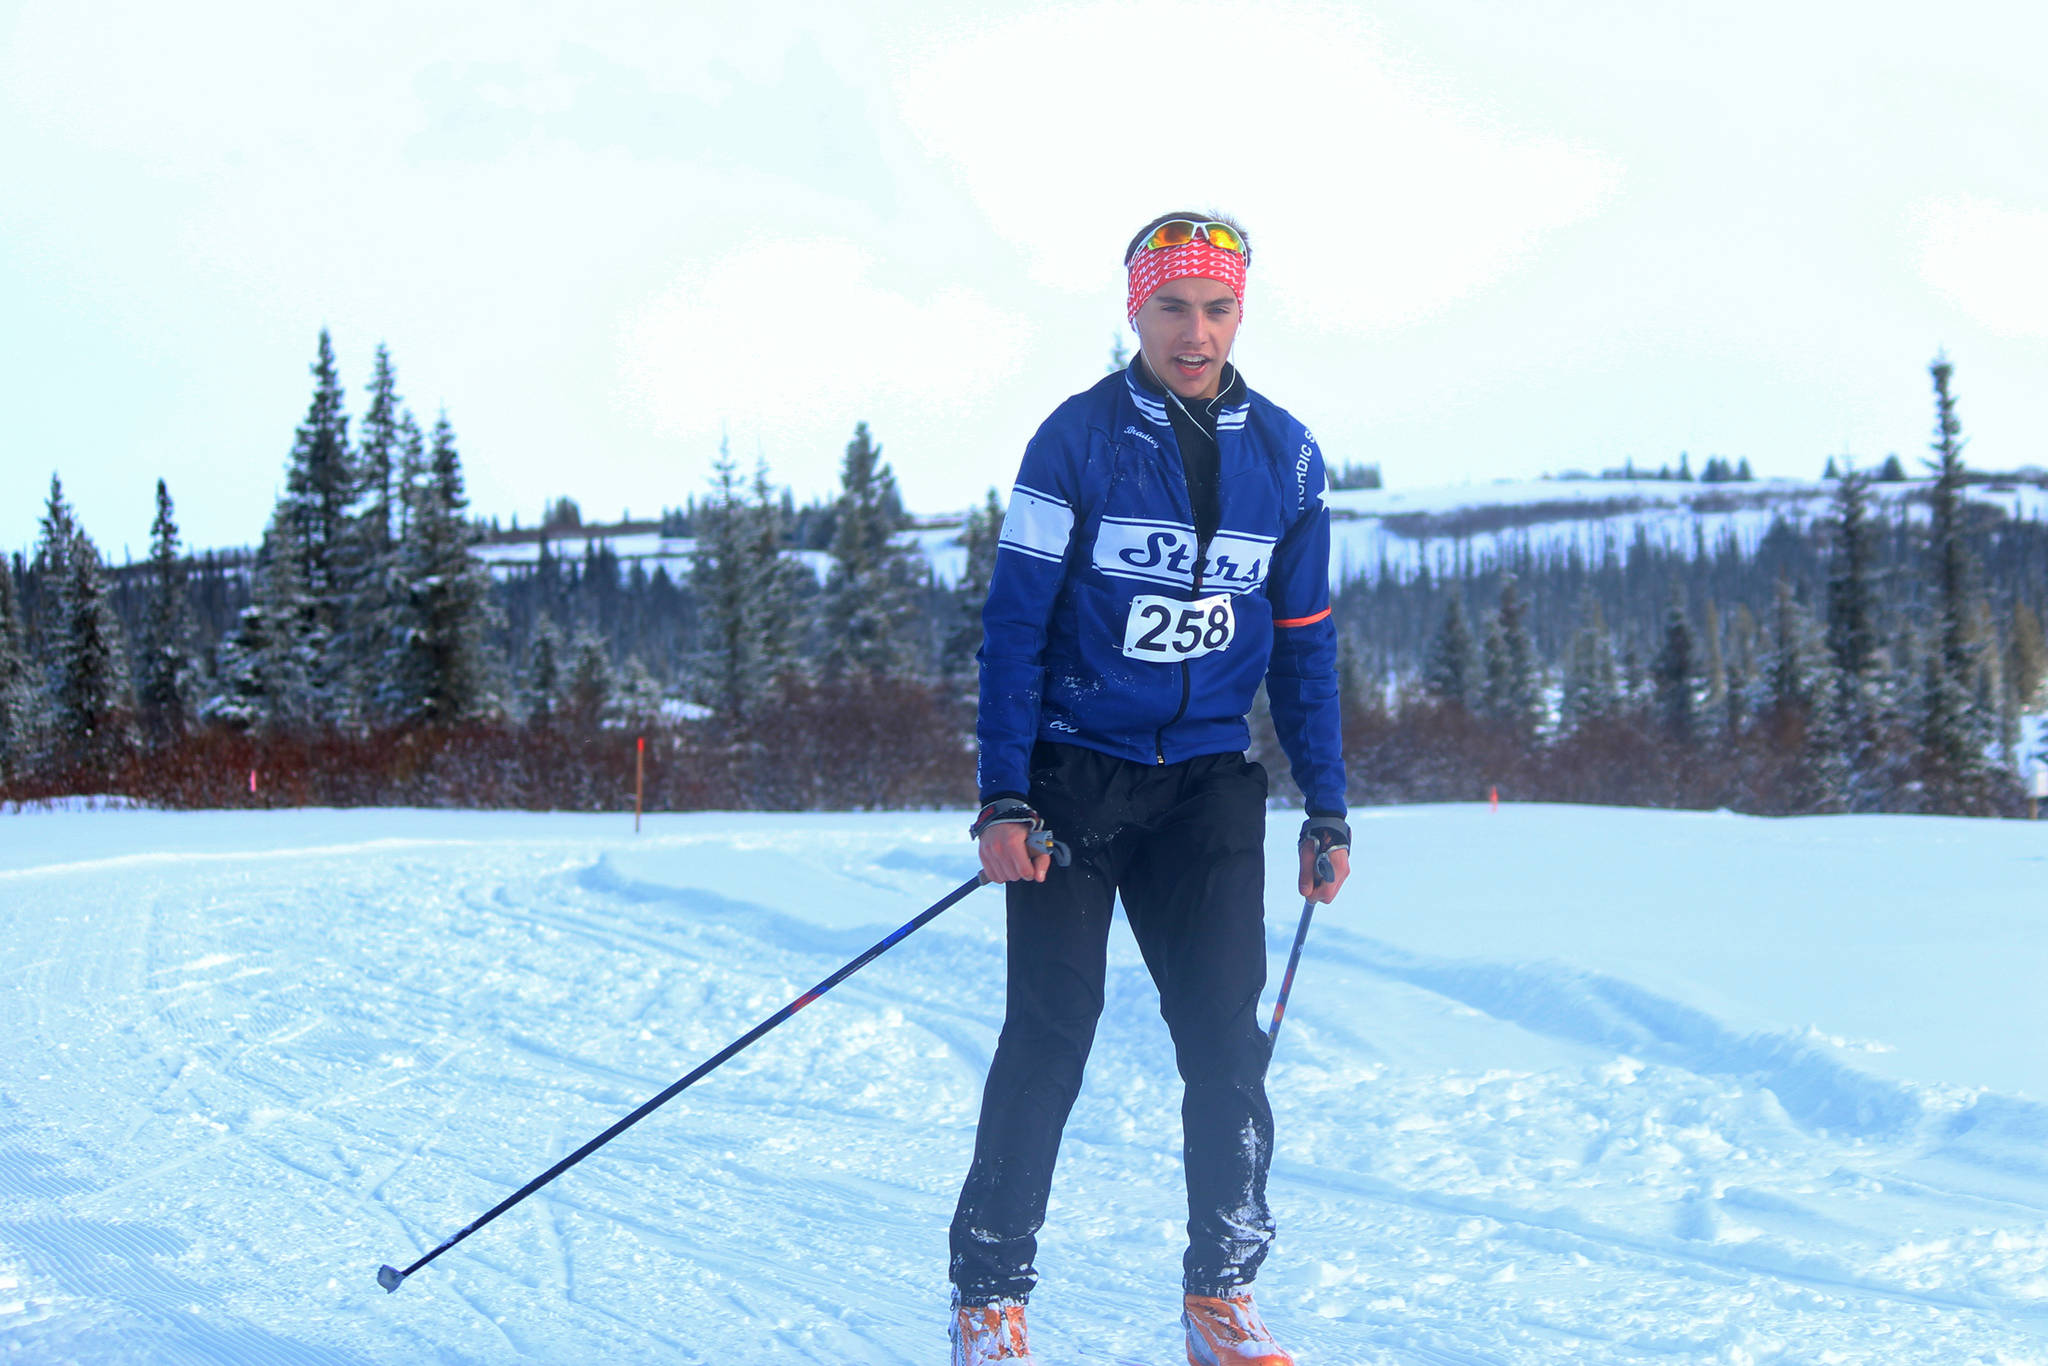 Bradley Walters, a sophomore on Soldotna High School’s ski team, crosses the finish line to take first place in the 25 Kilometer race of this year’s Kachemak Bay Nordic Ski Marathon on Saturday, March 8, 2018 at the McNeil Canyon Ski Area outside Homer, Alaska. (Photo by Megan Pacer/Homer News)